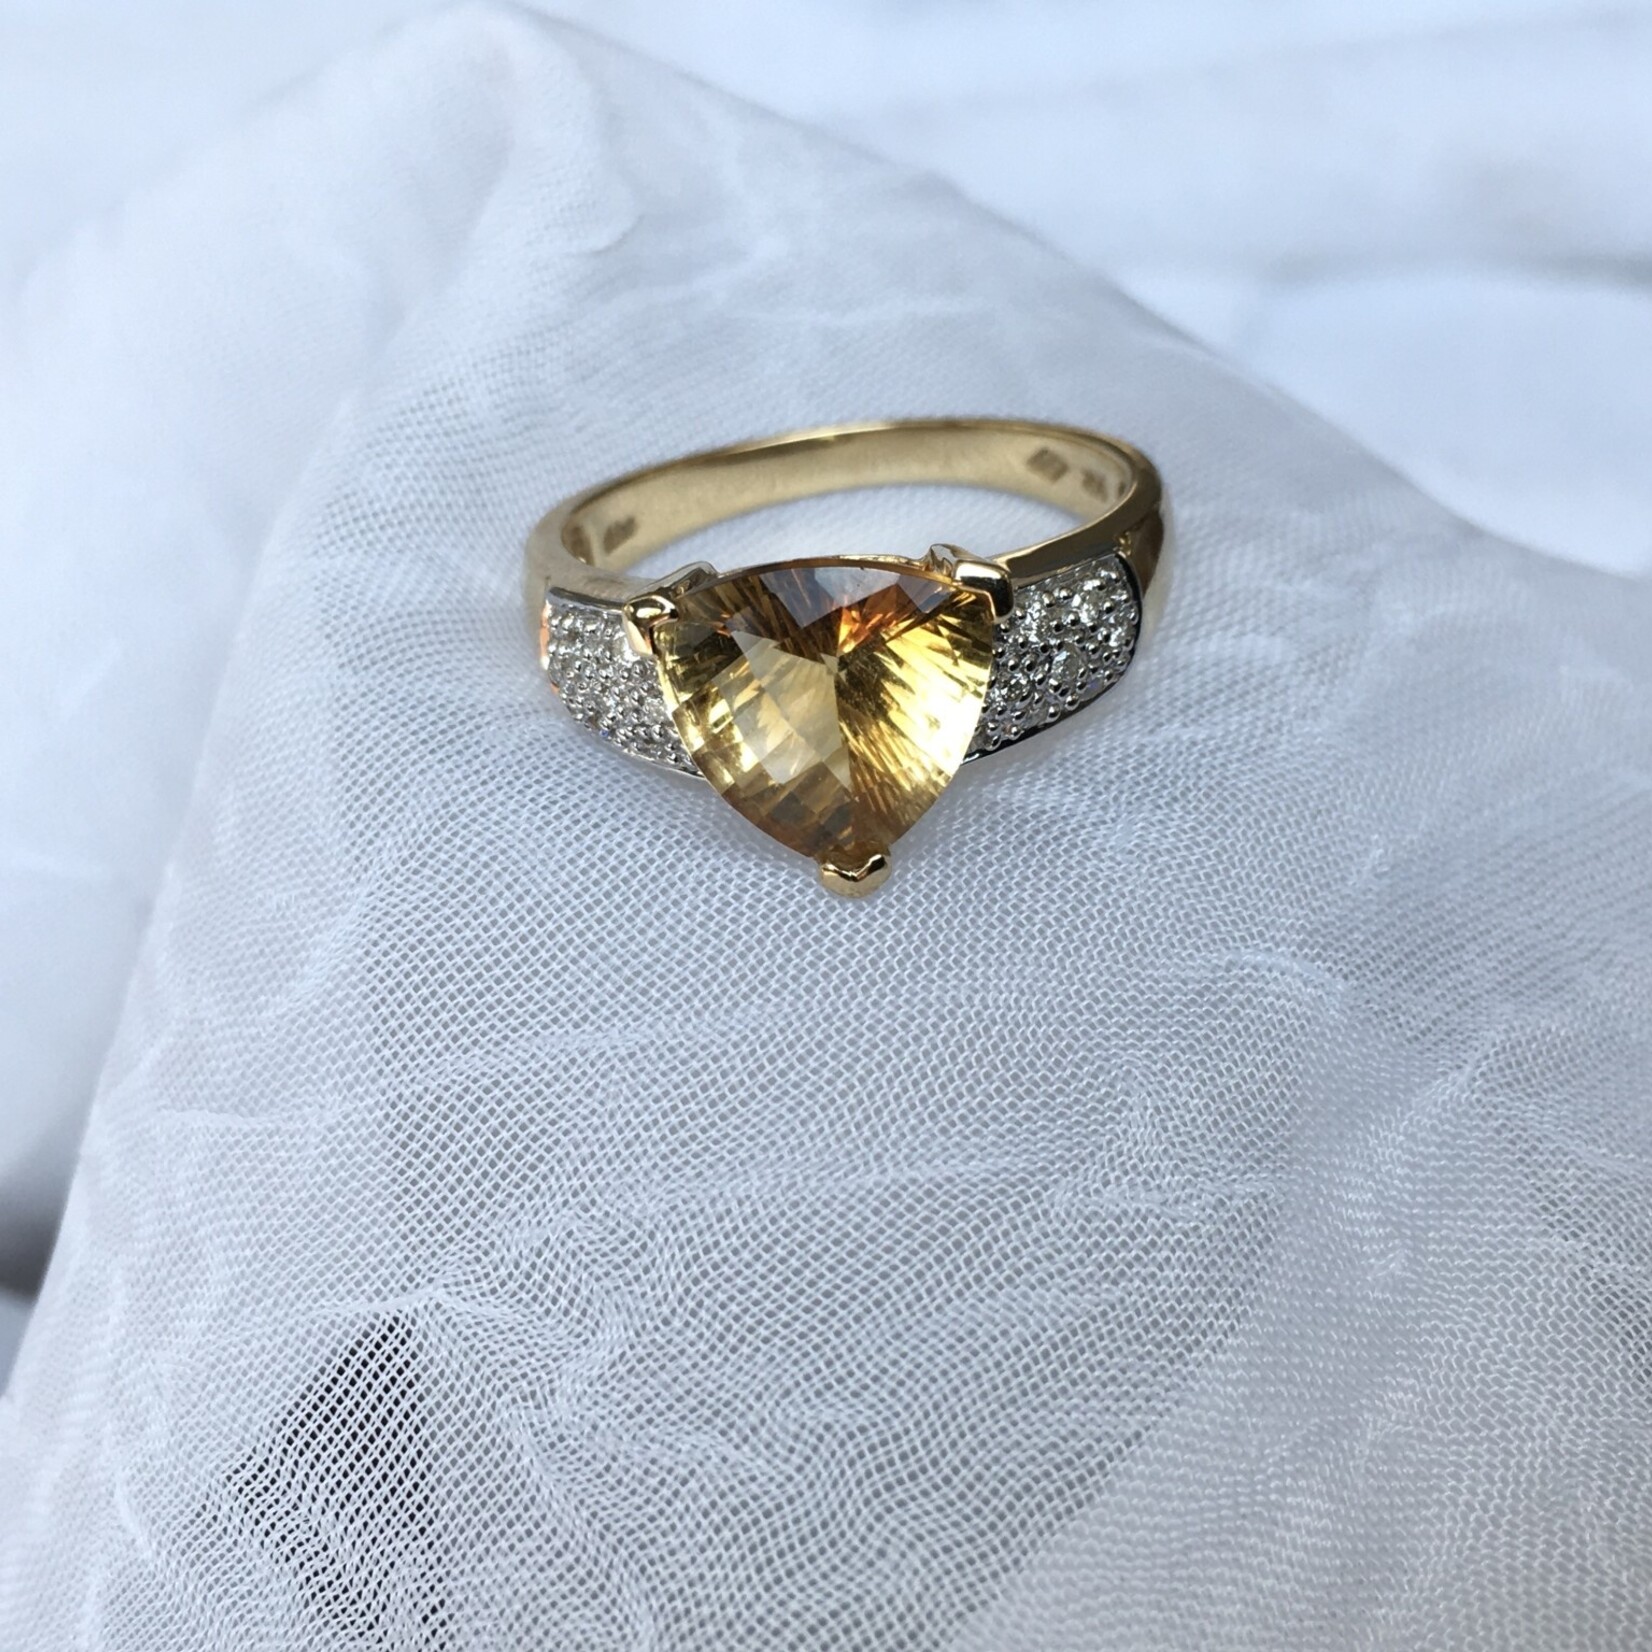 Franklin Jewelers 14kt Y Citrine and Diamond trillion ring